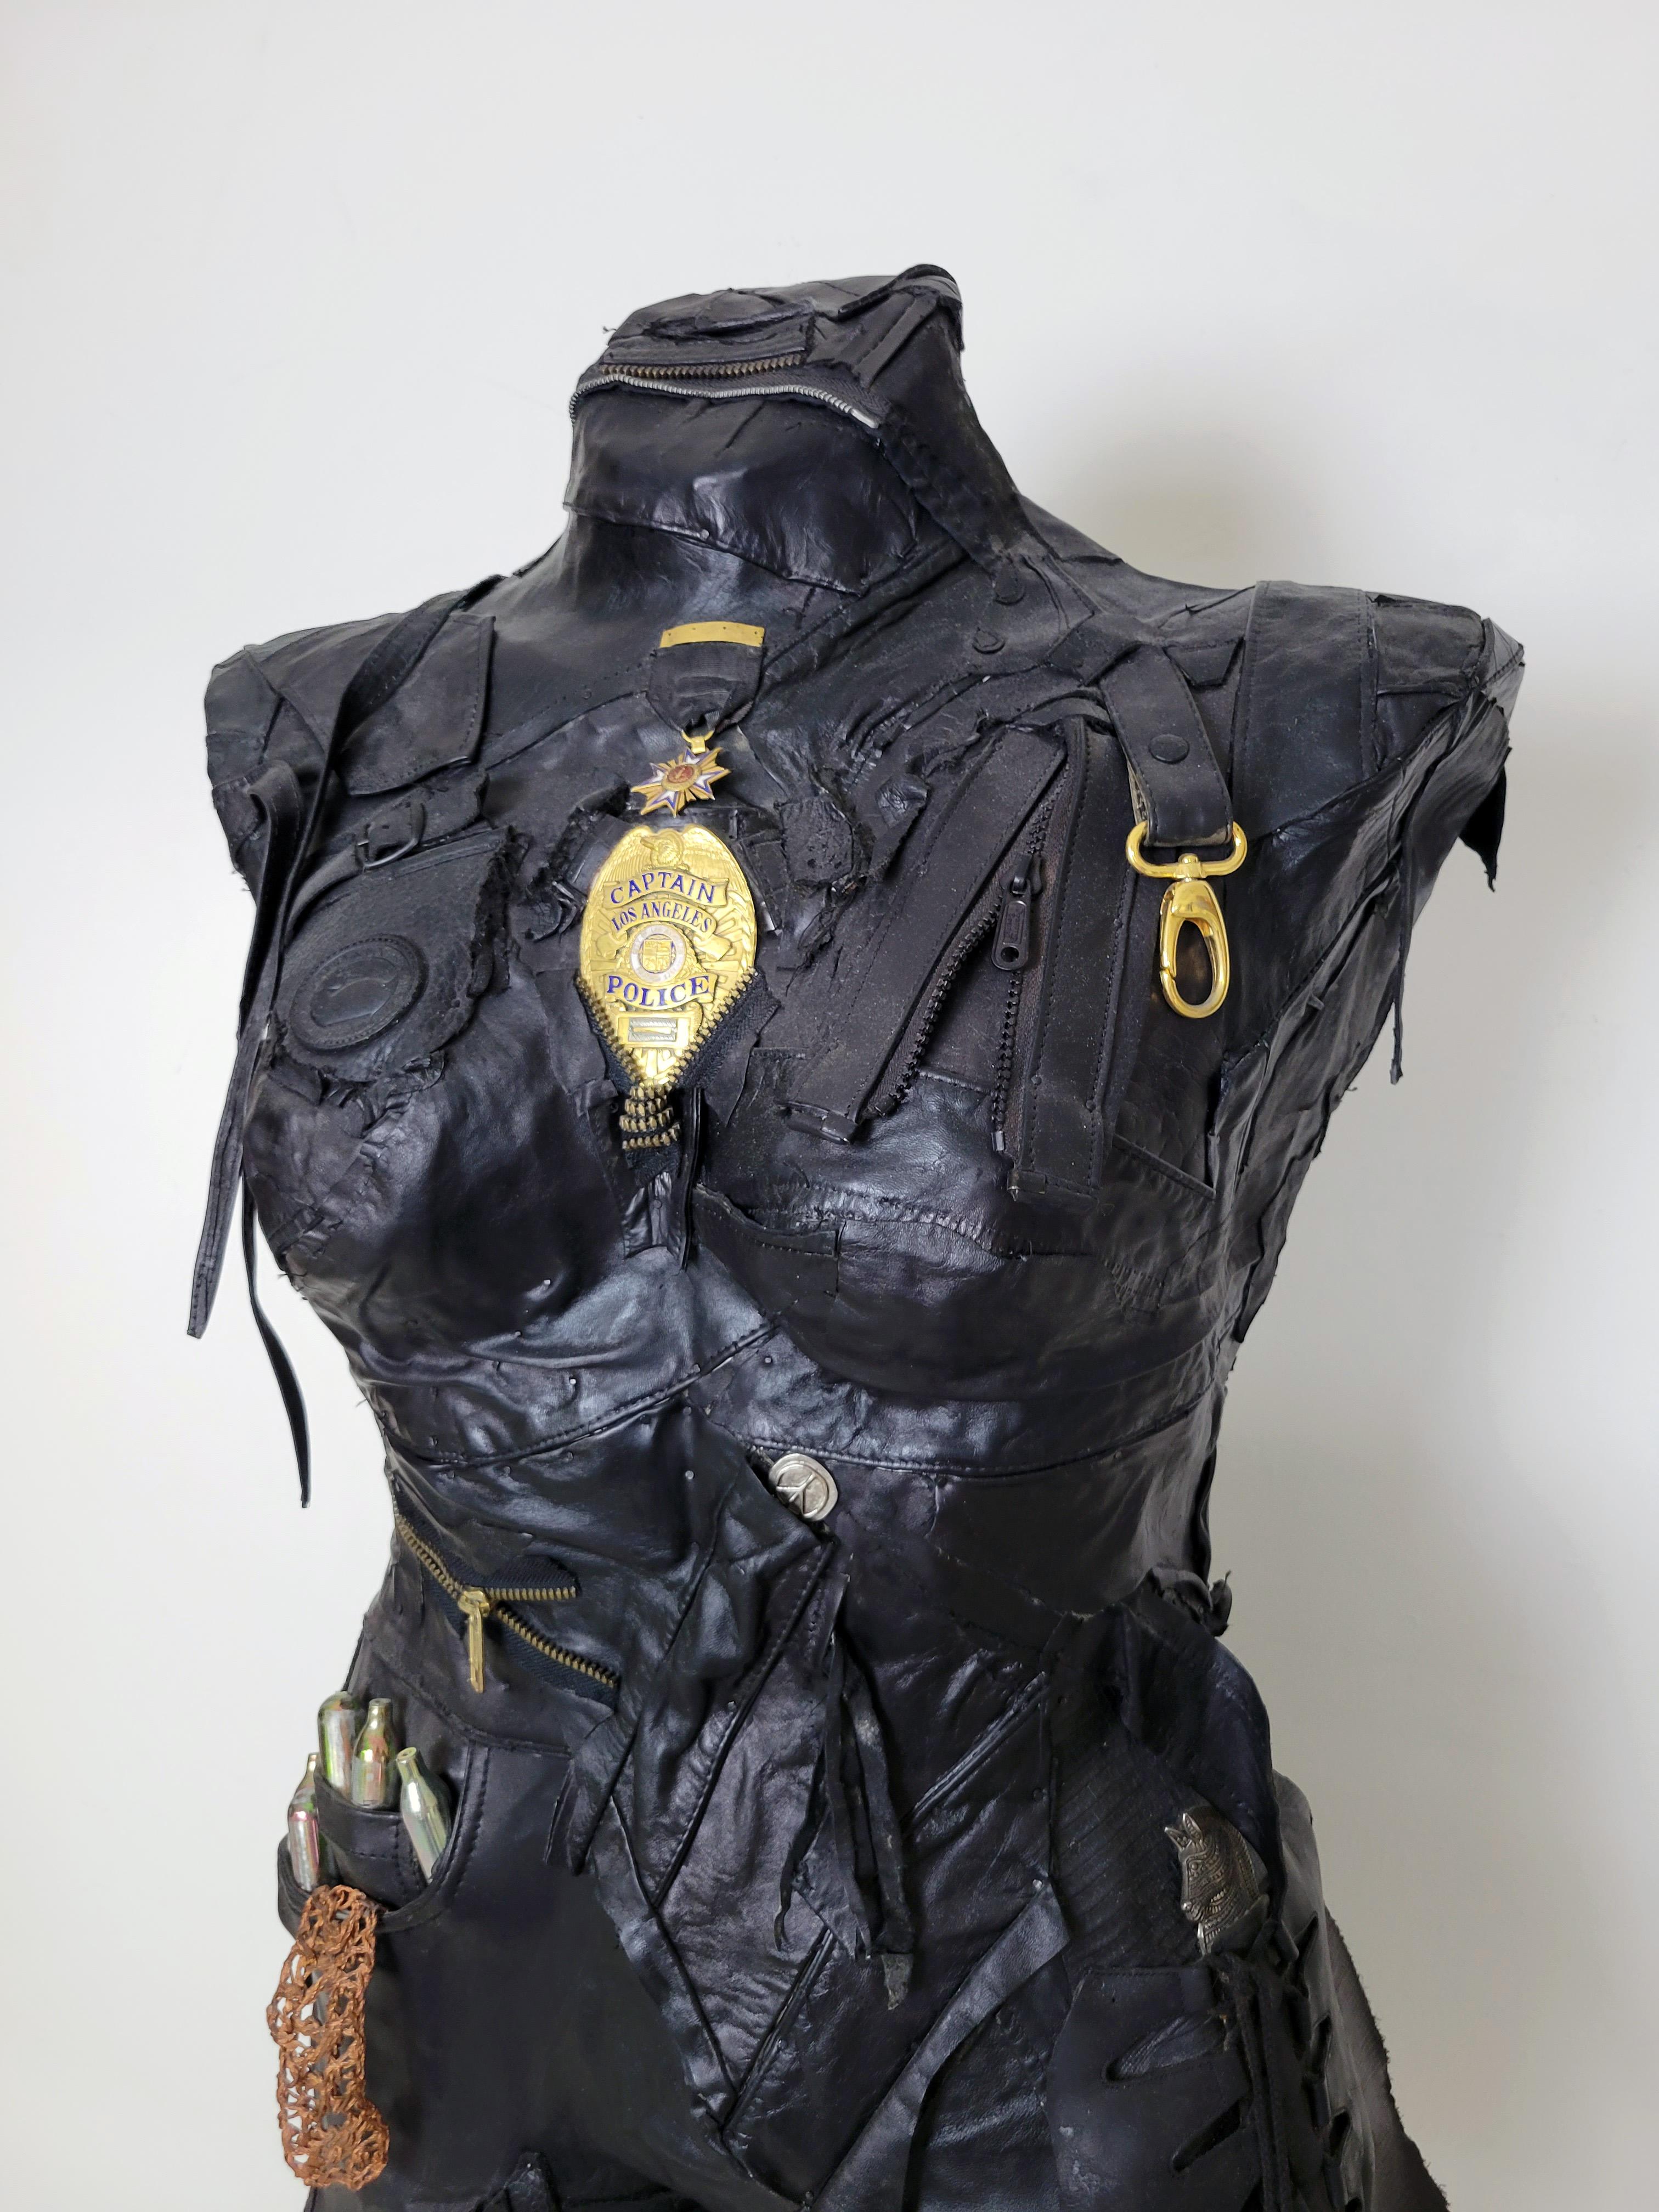 Linda Stein, Captain 701 - Feminist Contemporary Black/Silver Leather Metal Torso Sculpture

Starting in 2007, the artist Linda Stein began to explore gender multiplicities and diversities in her sculptural series The Fluidity of Gender.  The